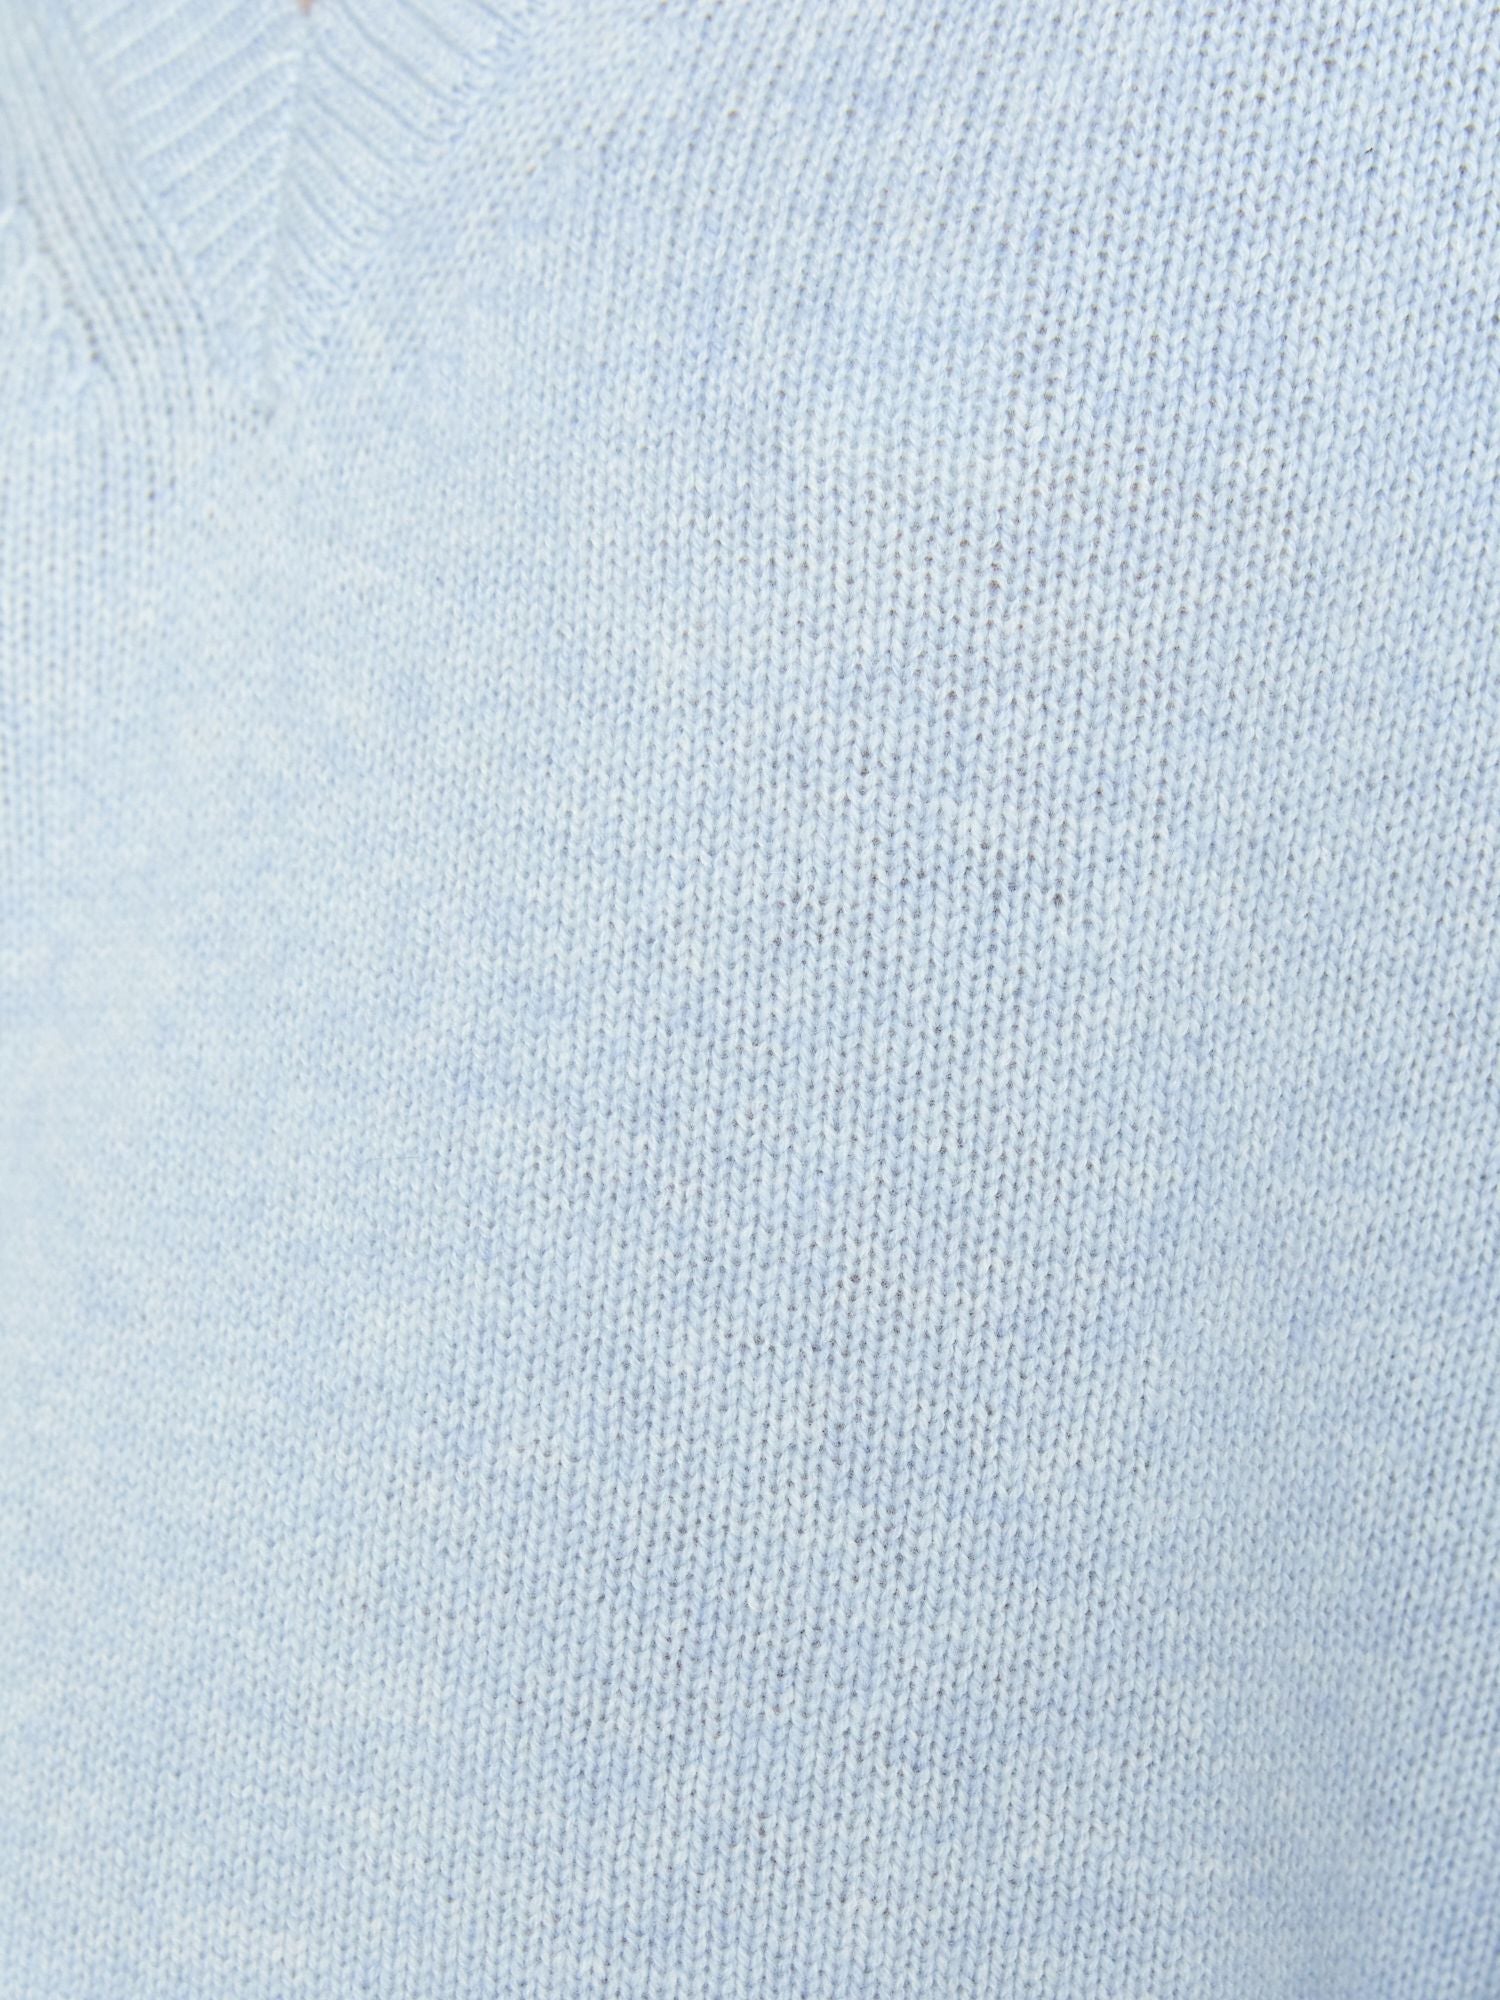 Looker light blue layered v-neck sweater close up 